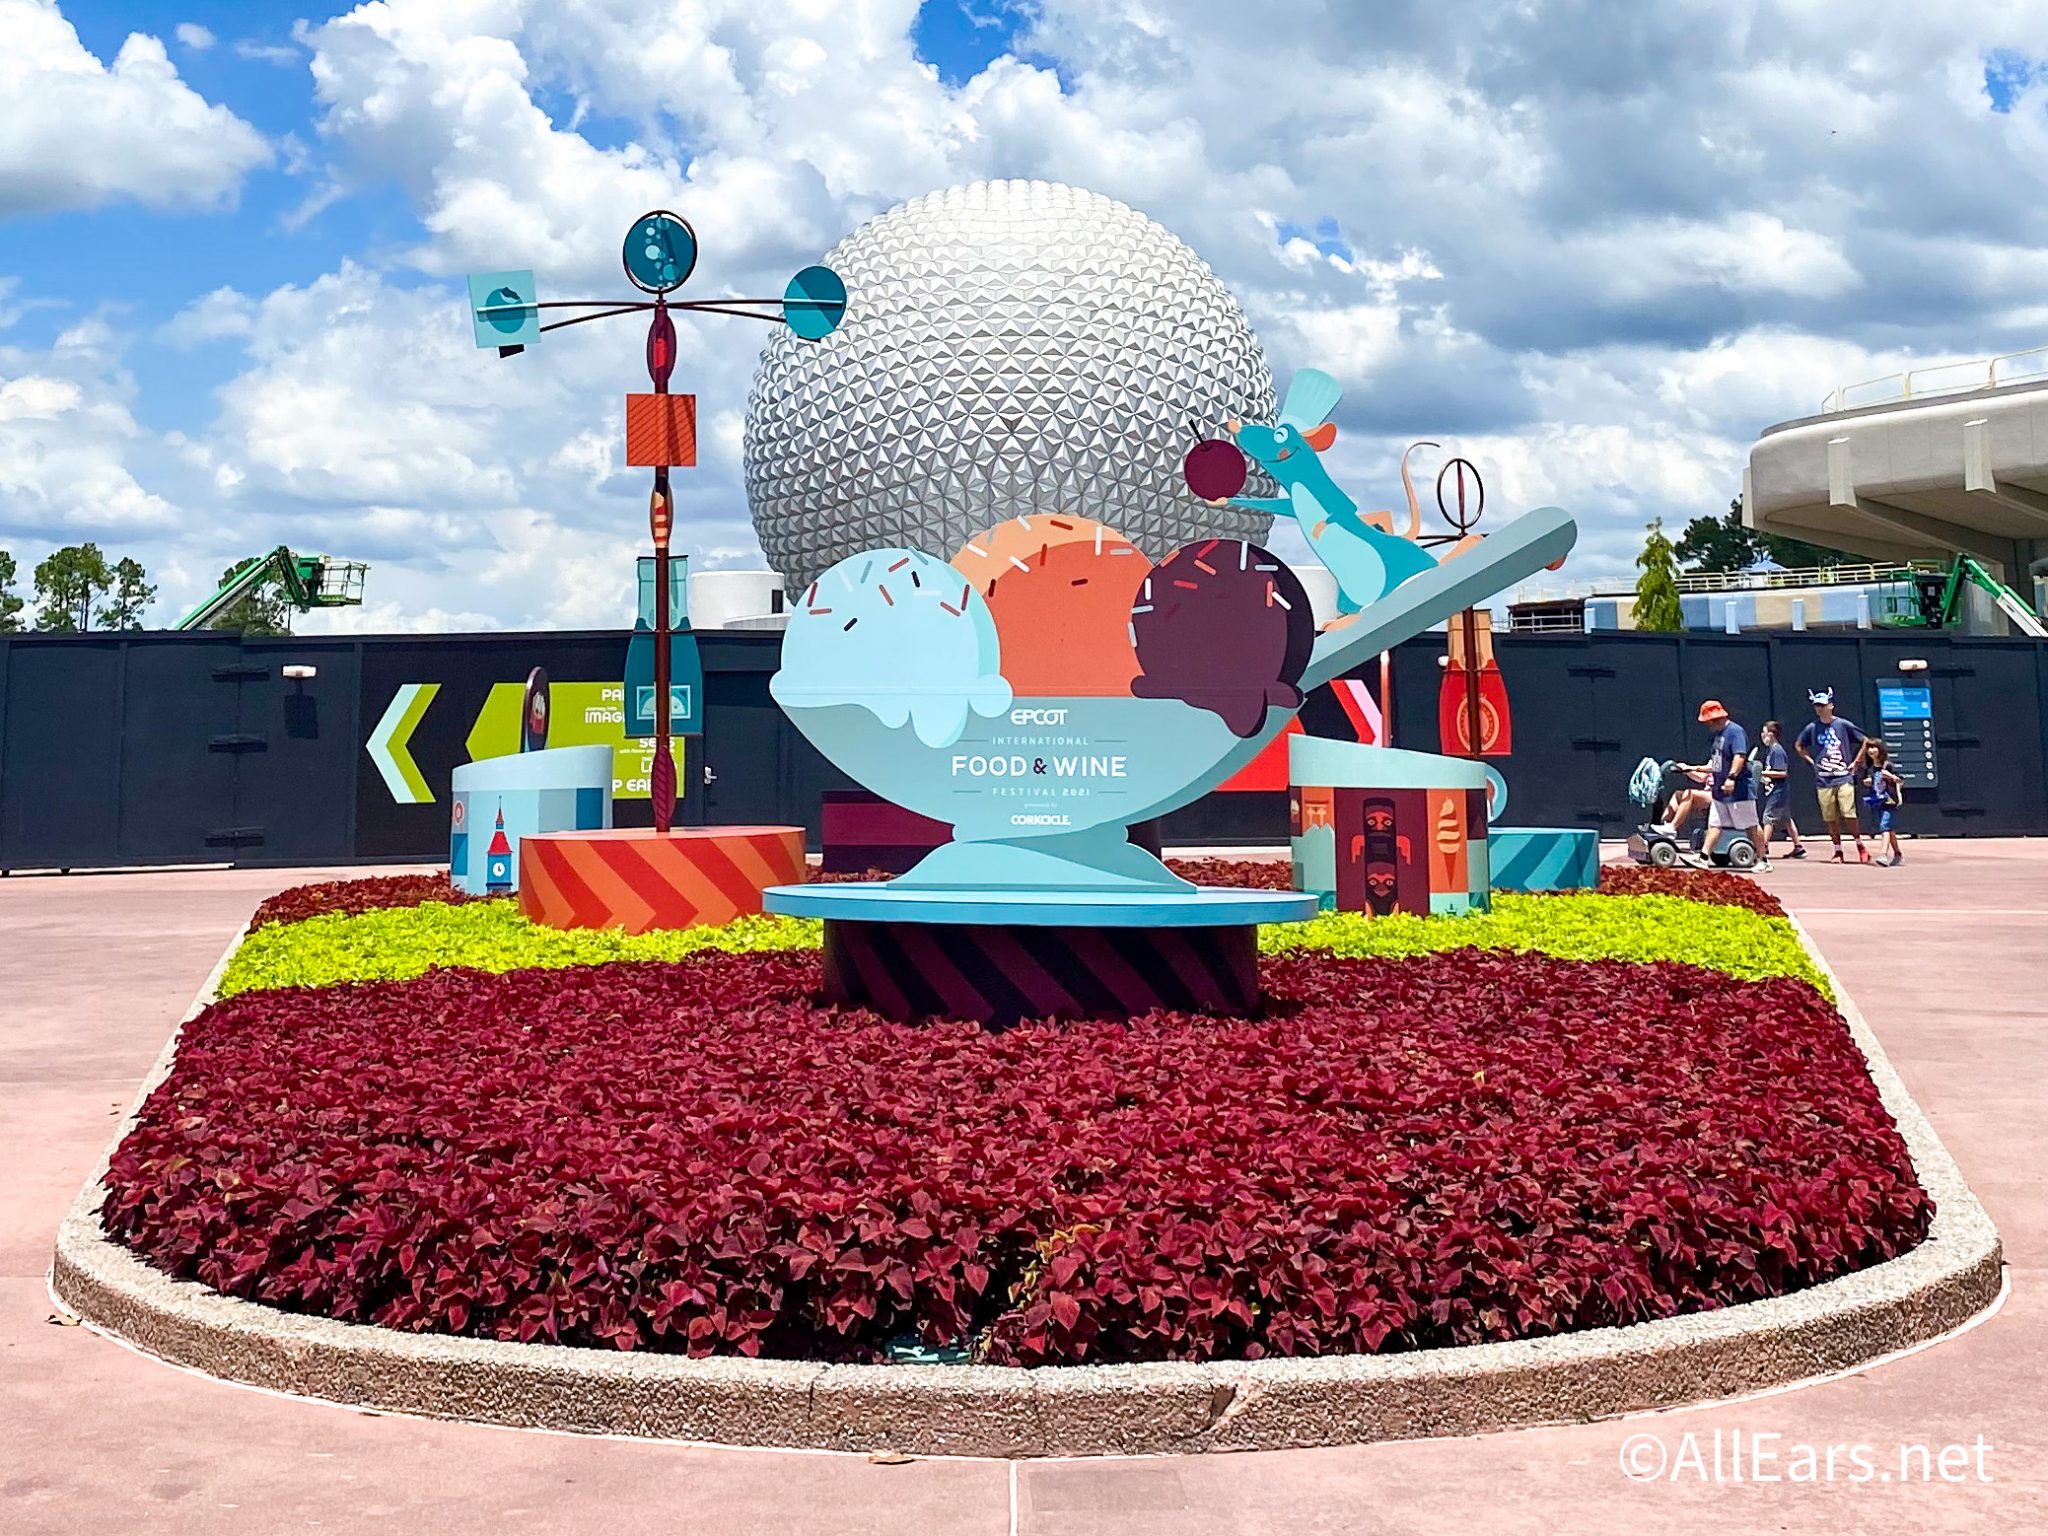 FULL LINEUP of Eat to the Beat Concert Series for 2022 EPCOT Food